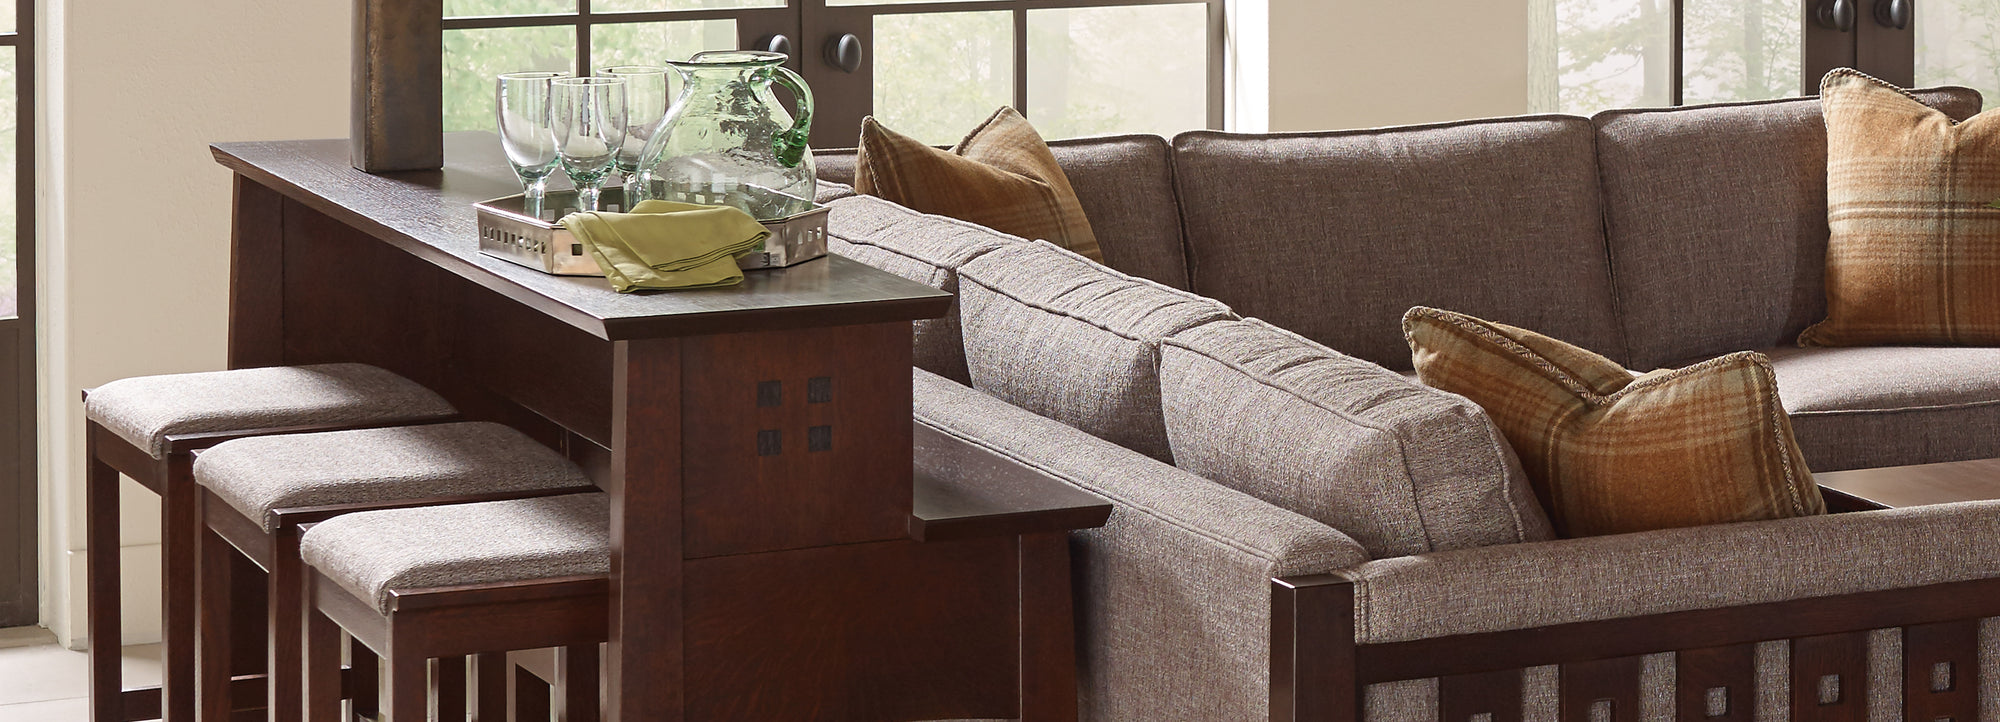 Stickley Furniture Gathering Island against gray sectional